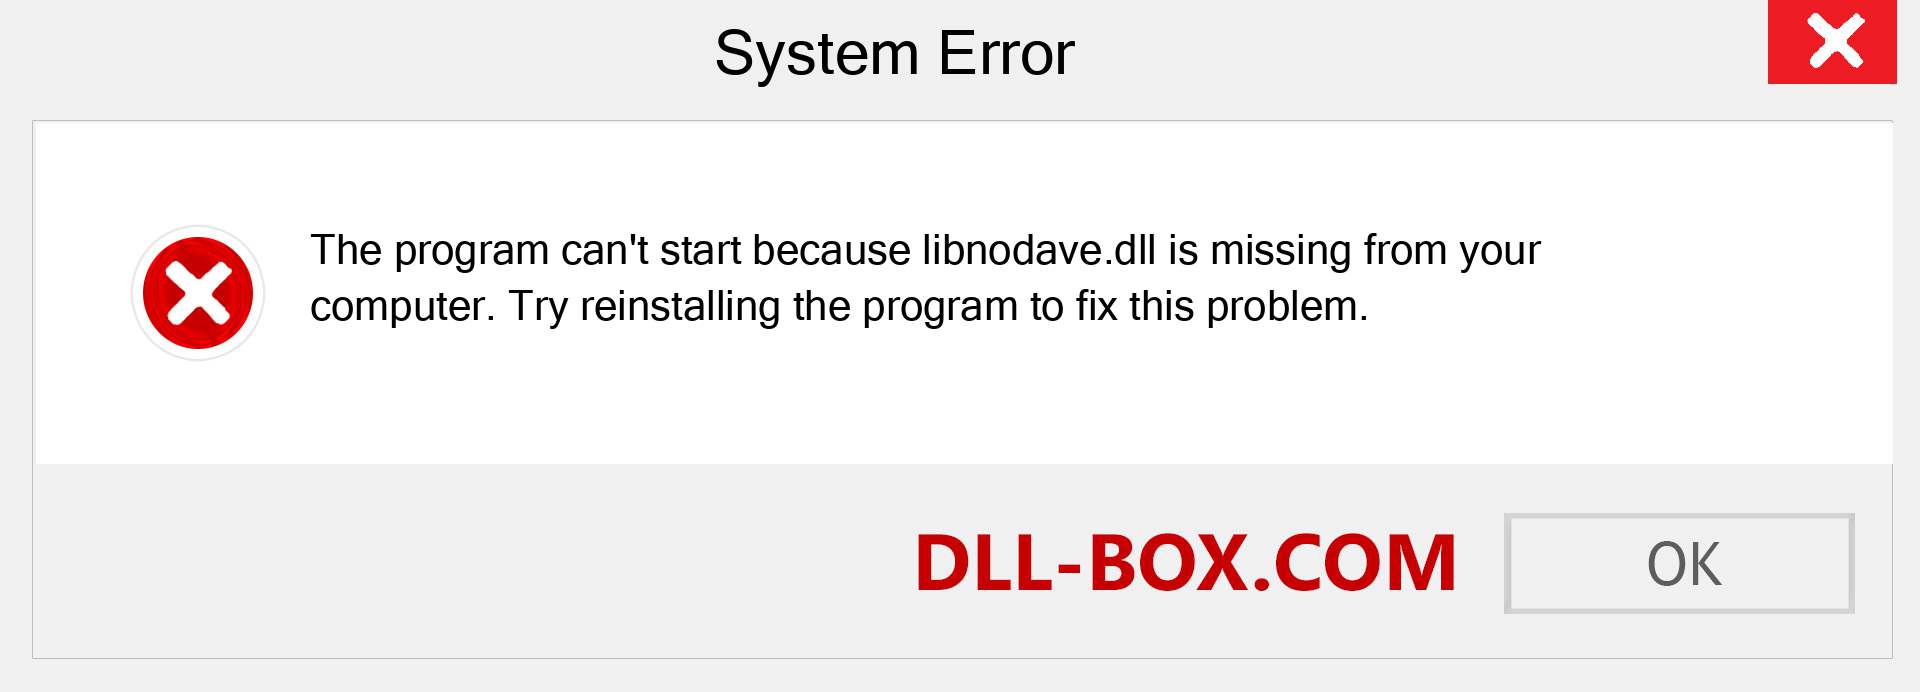  libnodave.dll file is missing?. Download for Windows 7, 8, 10 - Fix  libnodave dll Missing Error on Windows, photos, images